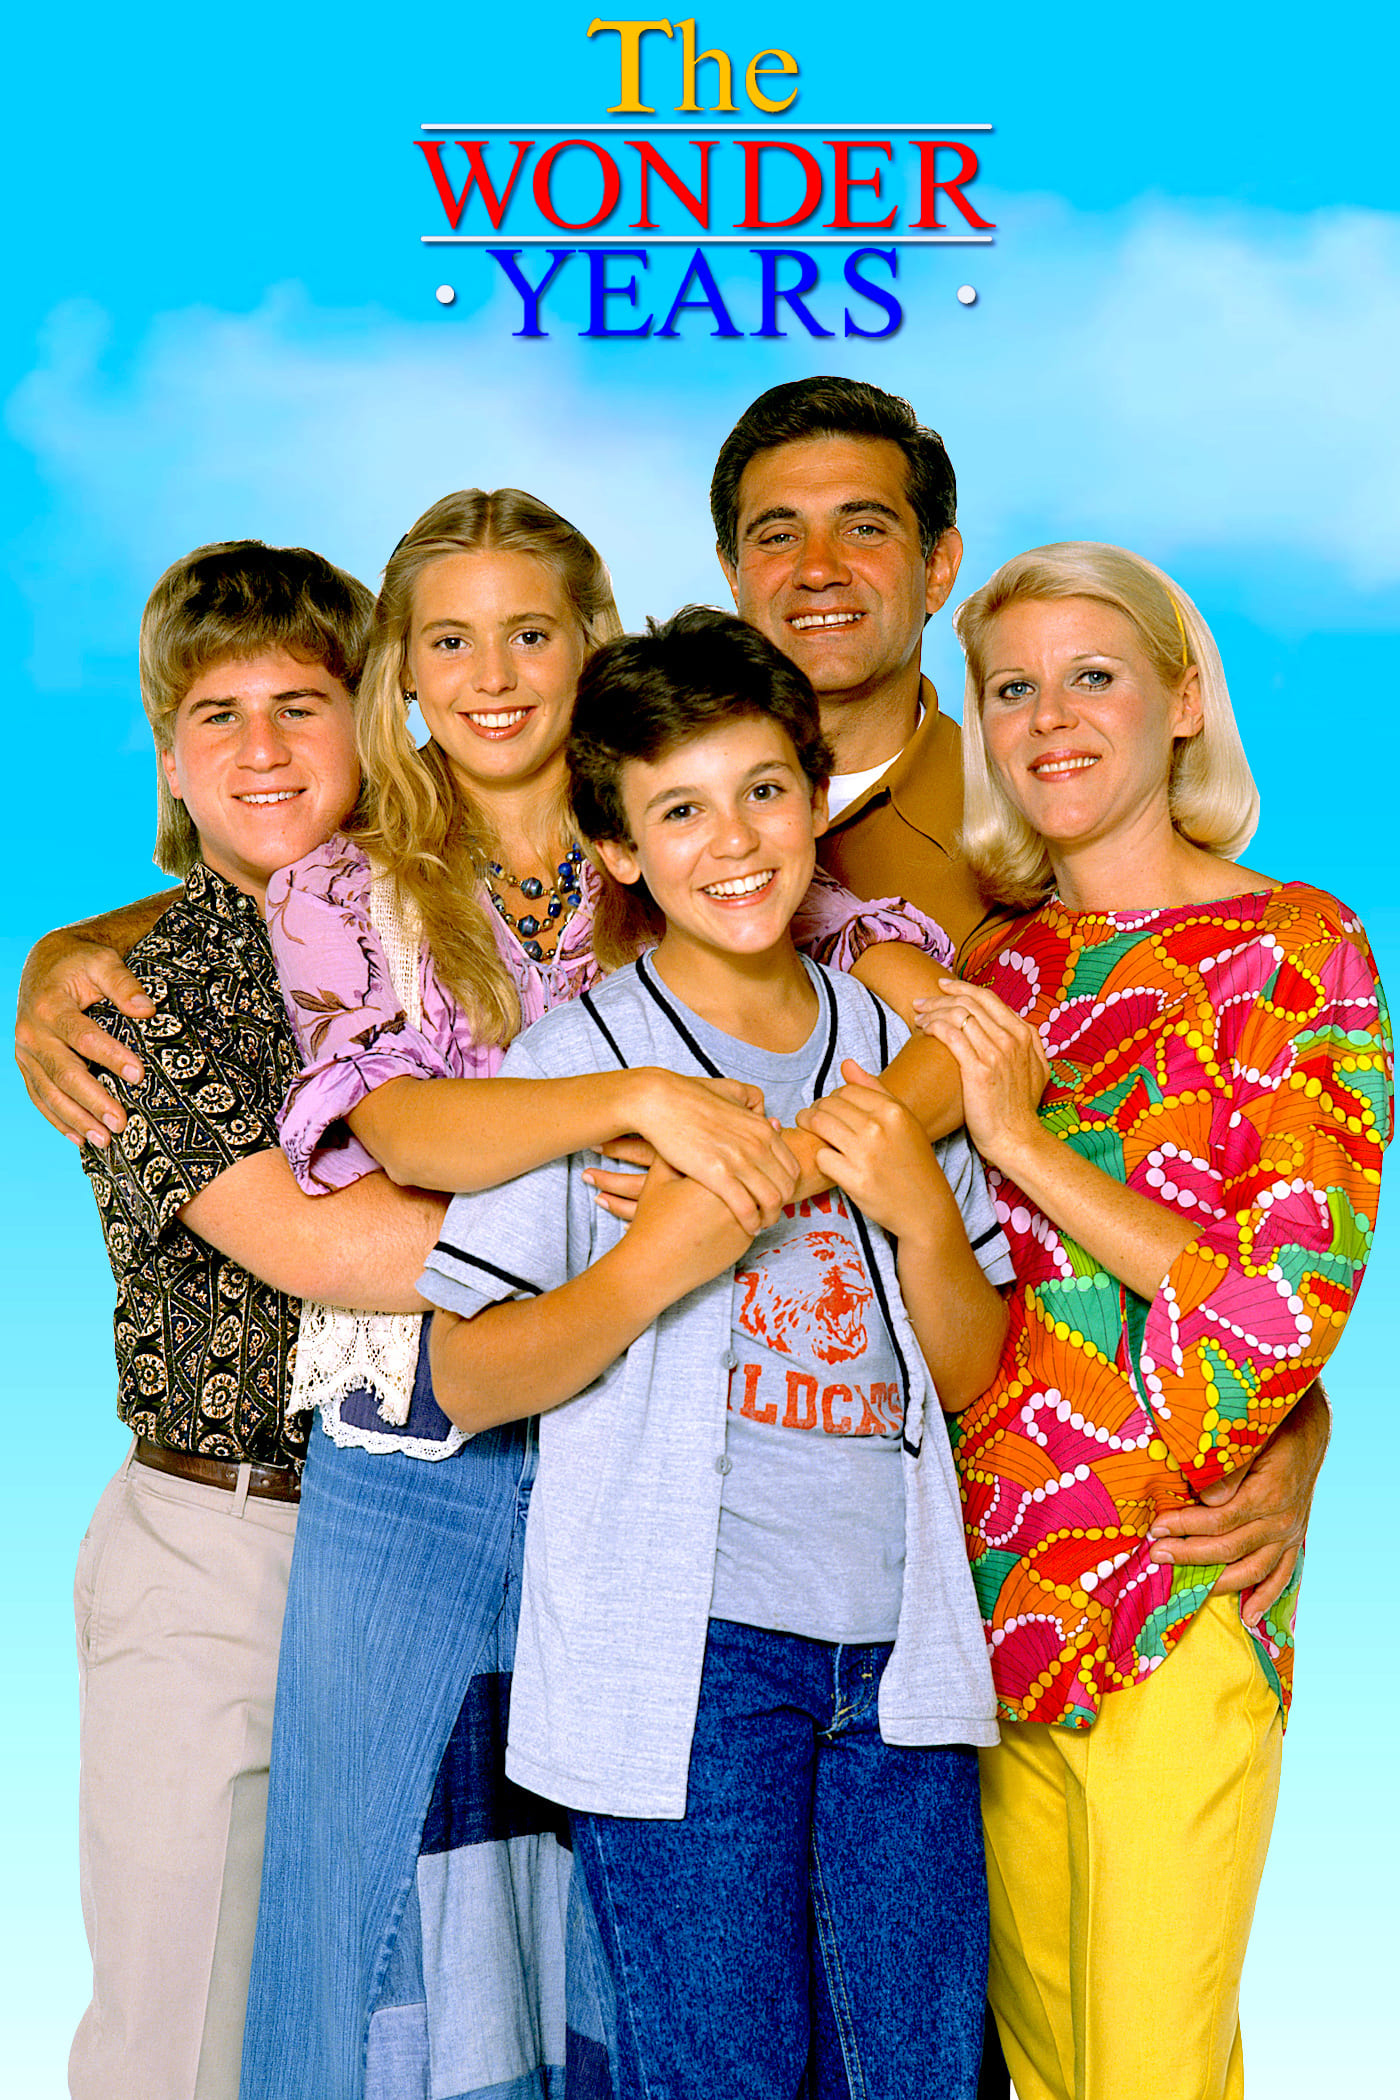 The Wonder Years TV Shows About Junior High School